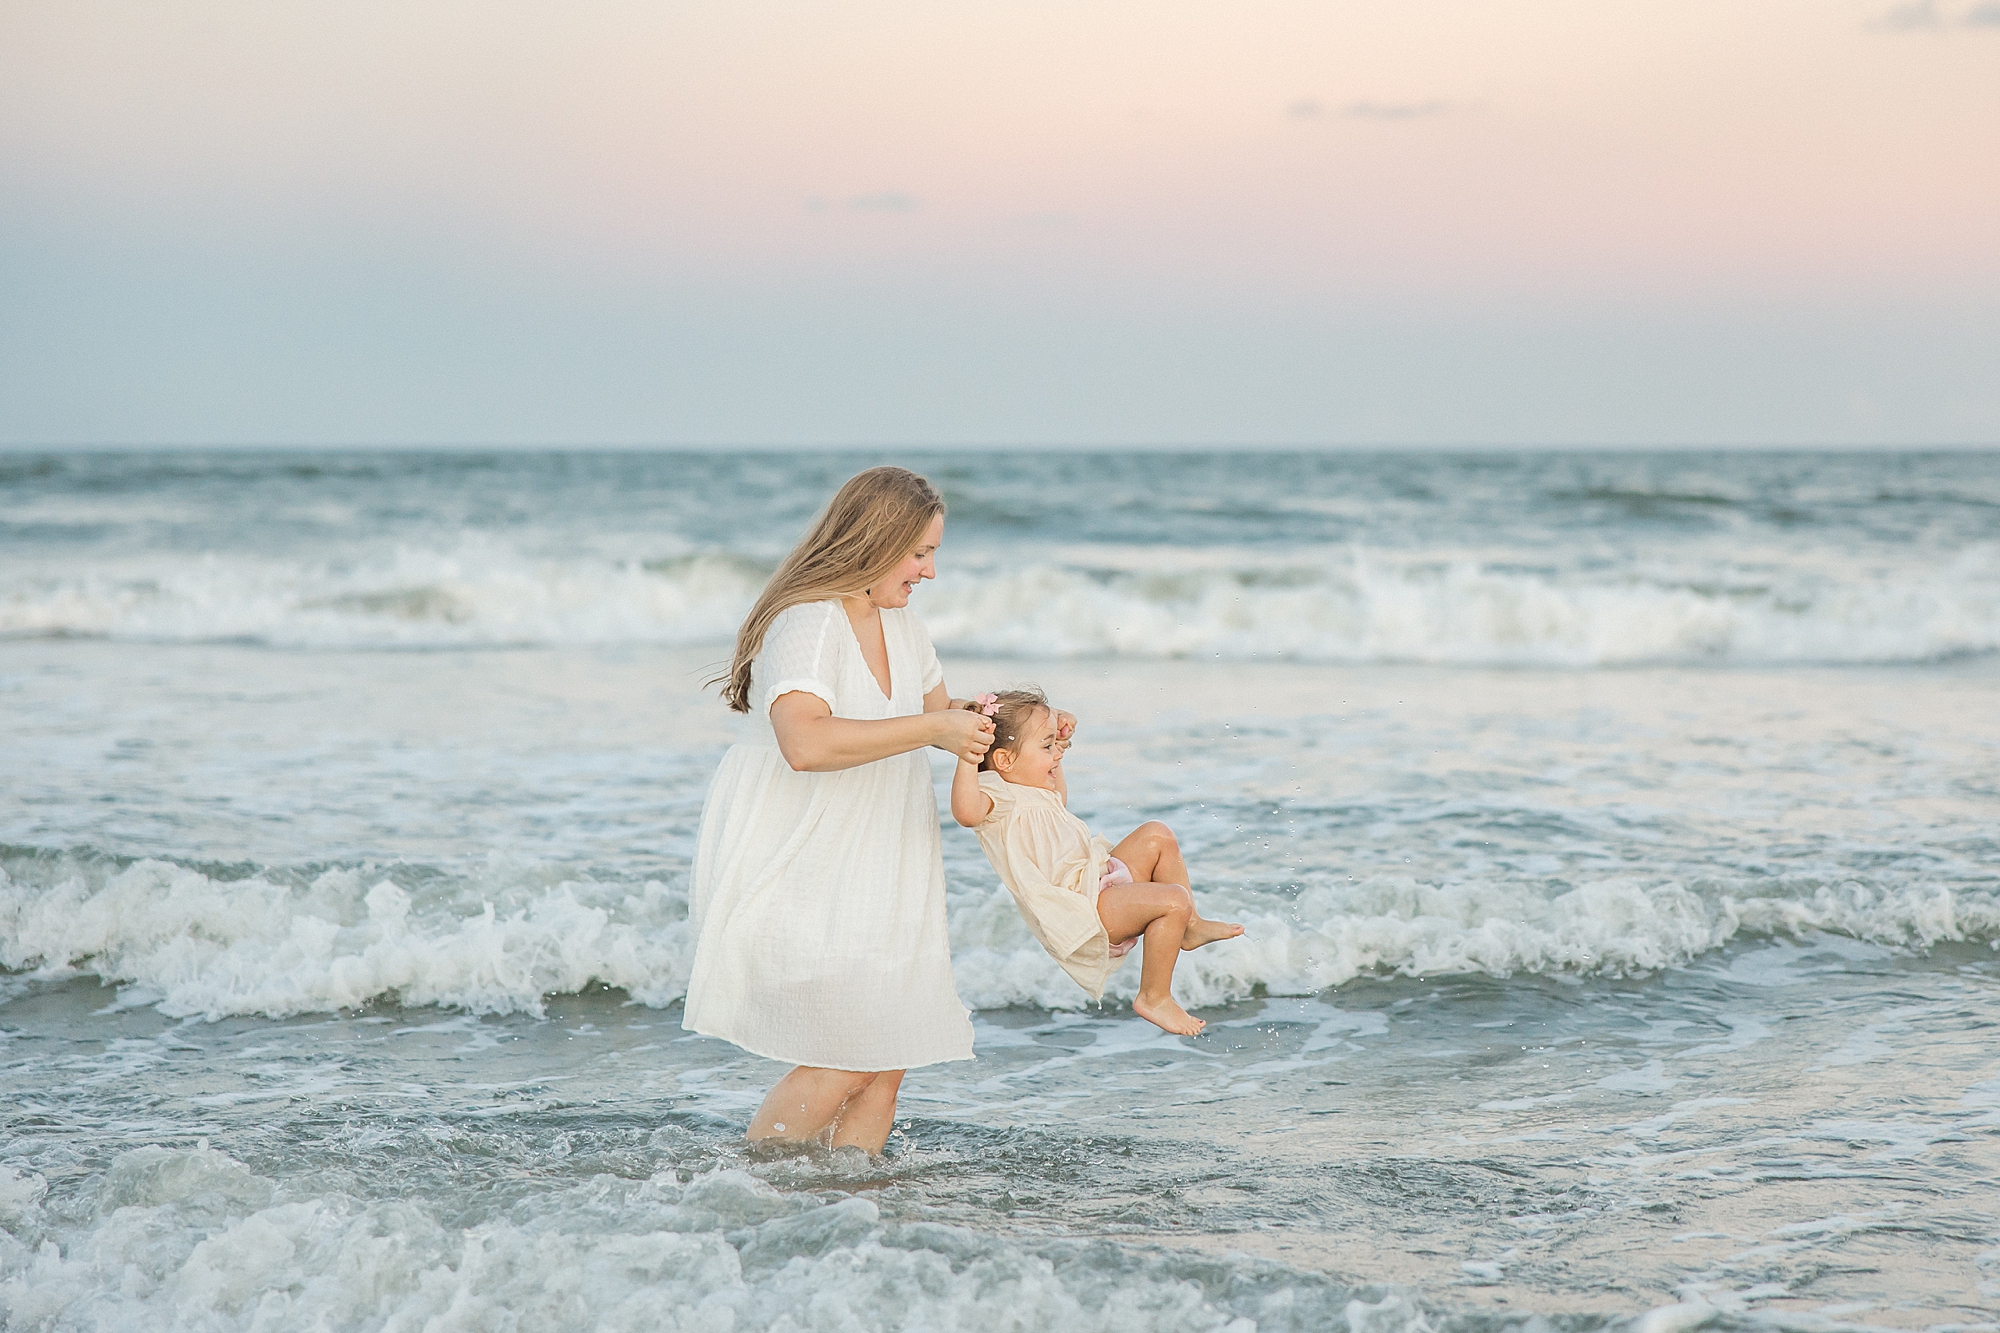 mother and daughter play in the ocean waves Isle of Palms